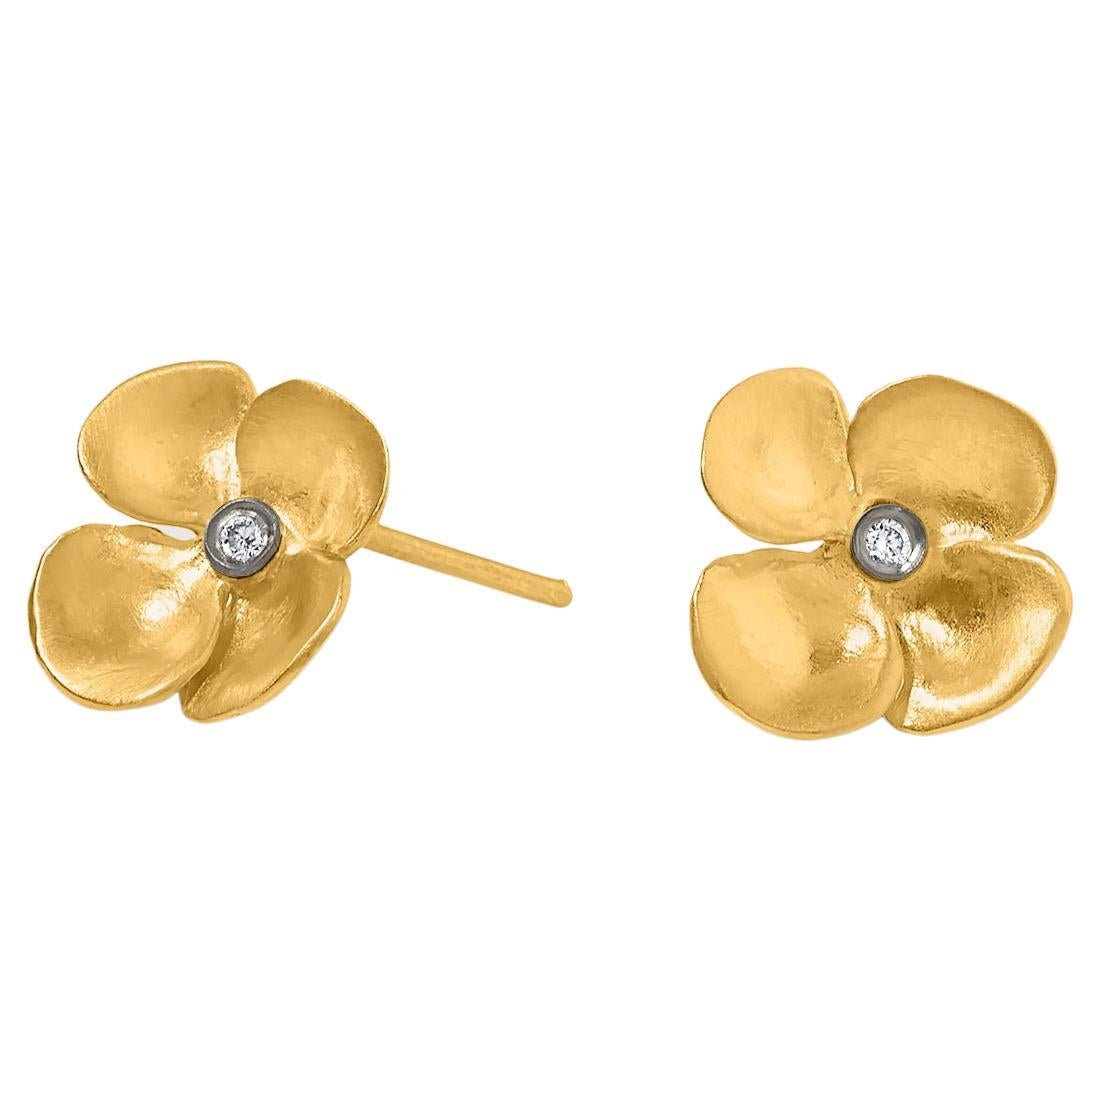 Small Classic Flower Earrings with Diamonds 24 Karat Gold and Silver by Kurtulan